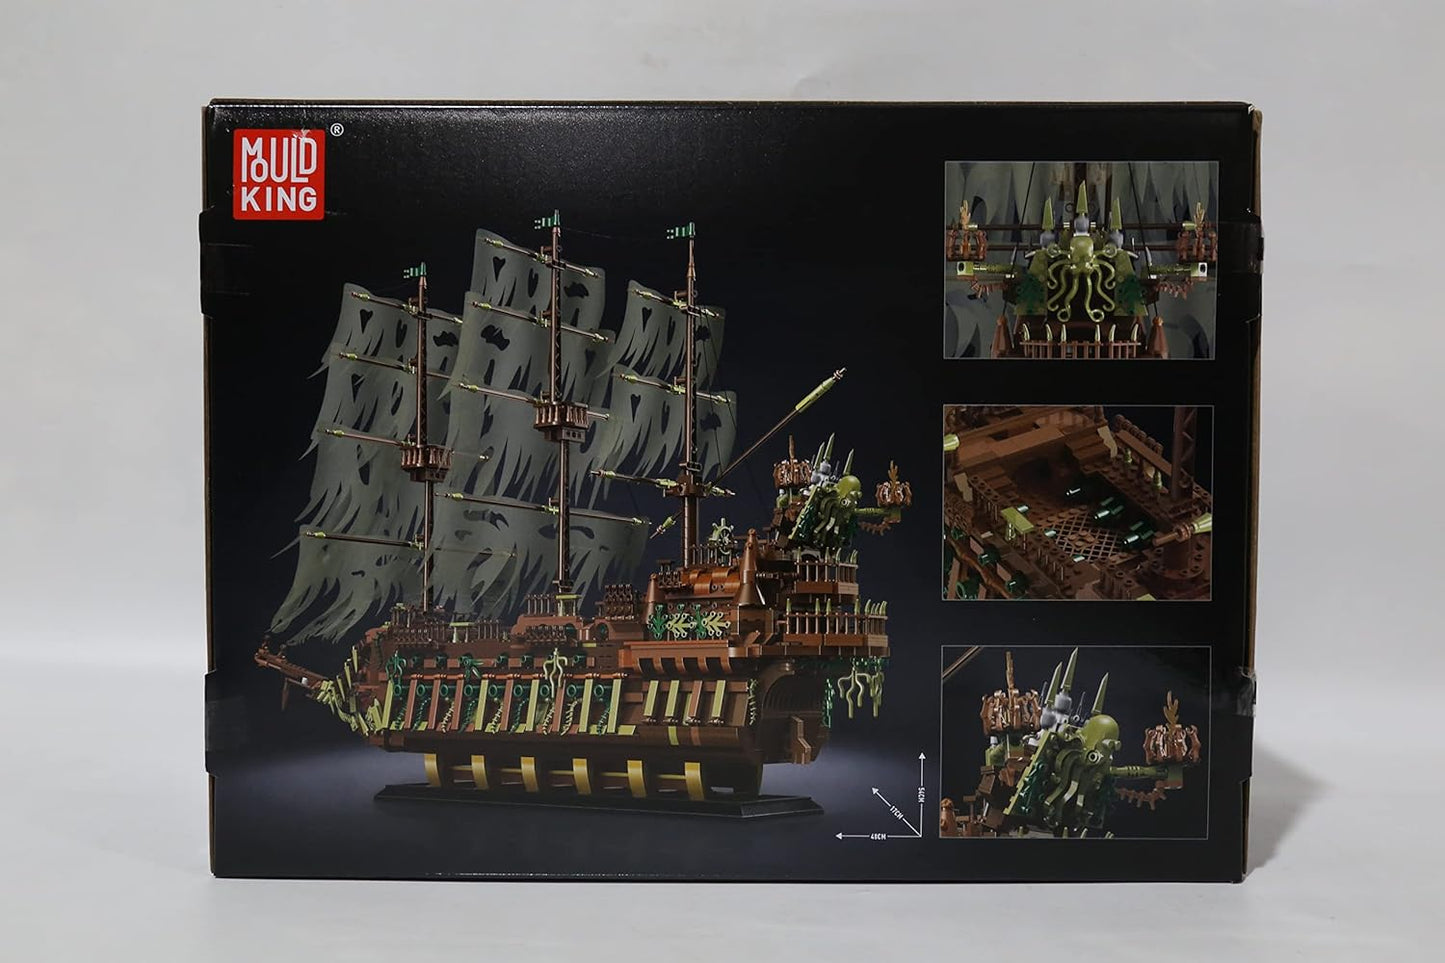 Mould King Large Pirates Ship Model Building Kits, MOC Dutchman Building Block Pirate Ship Construction Set to Build, Toys Gift for Kids Age 8+/Adult Collections Enthusiasts (3700+Pieces)